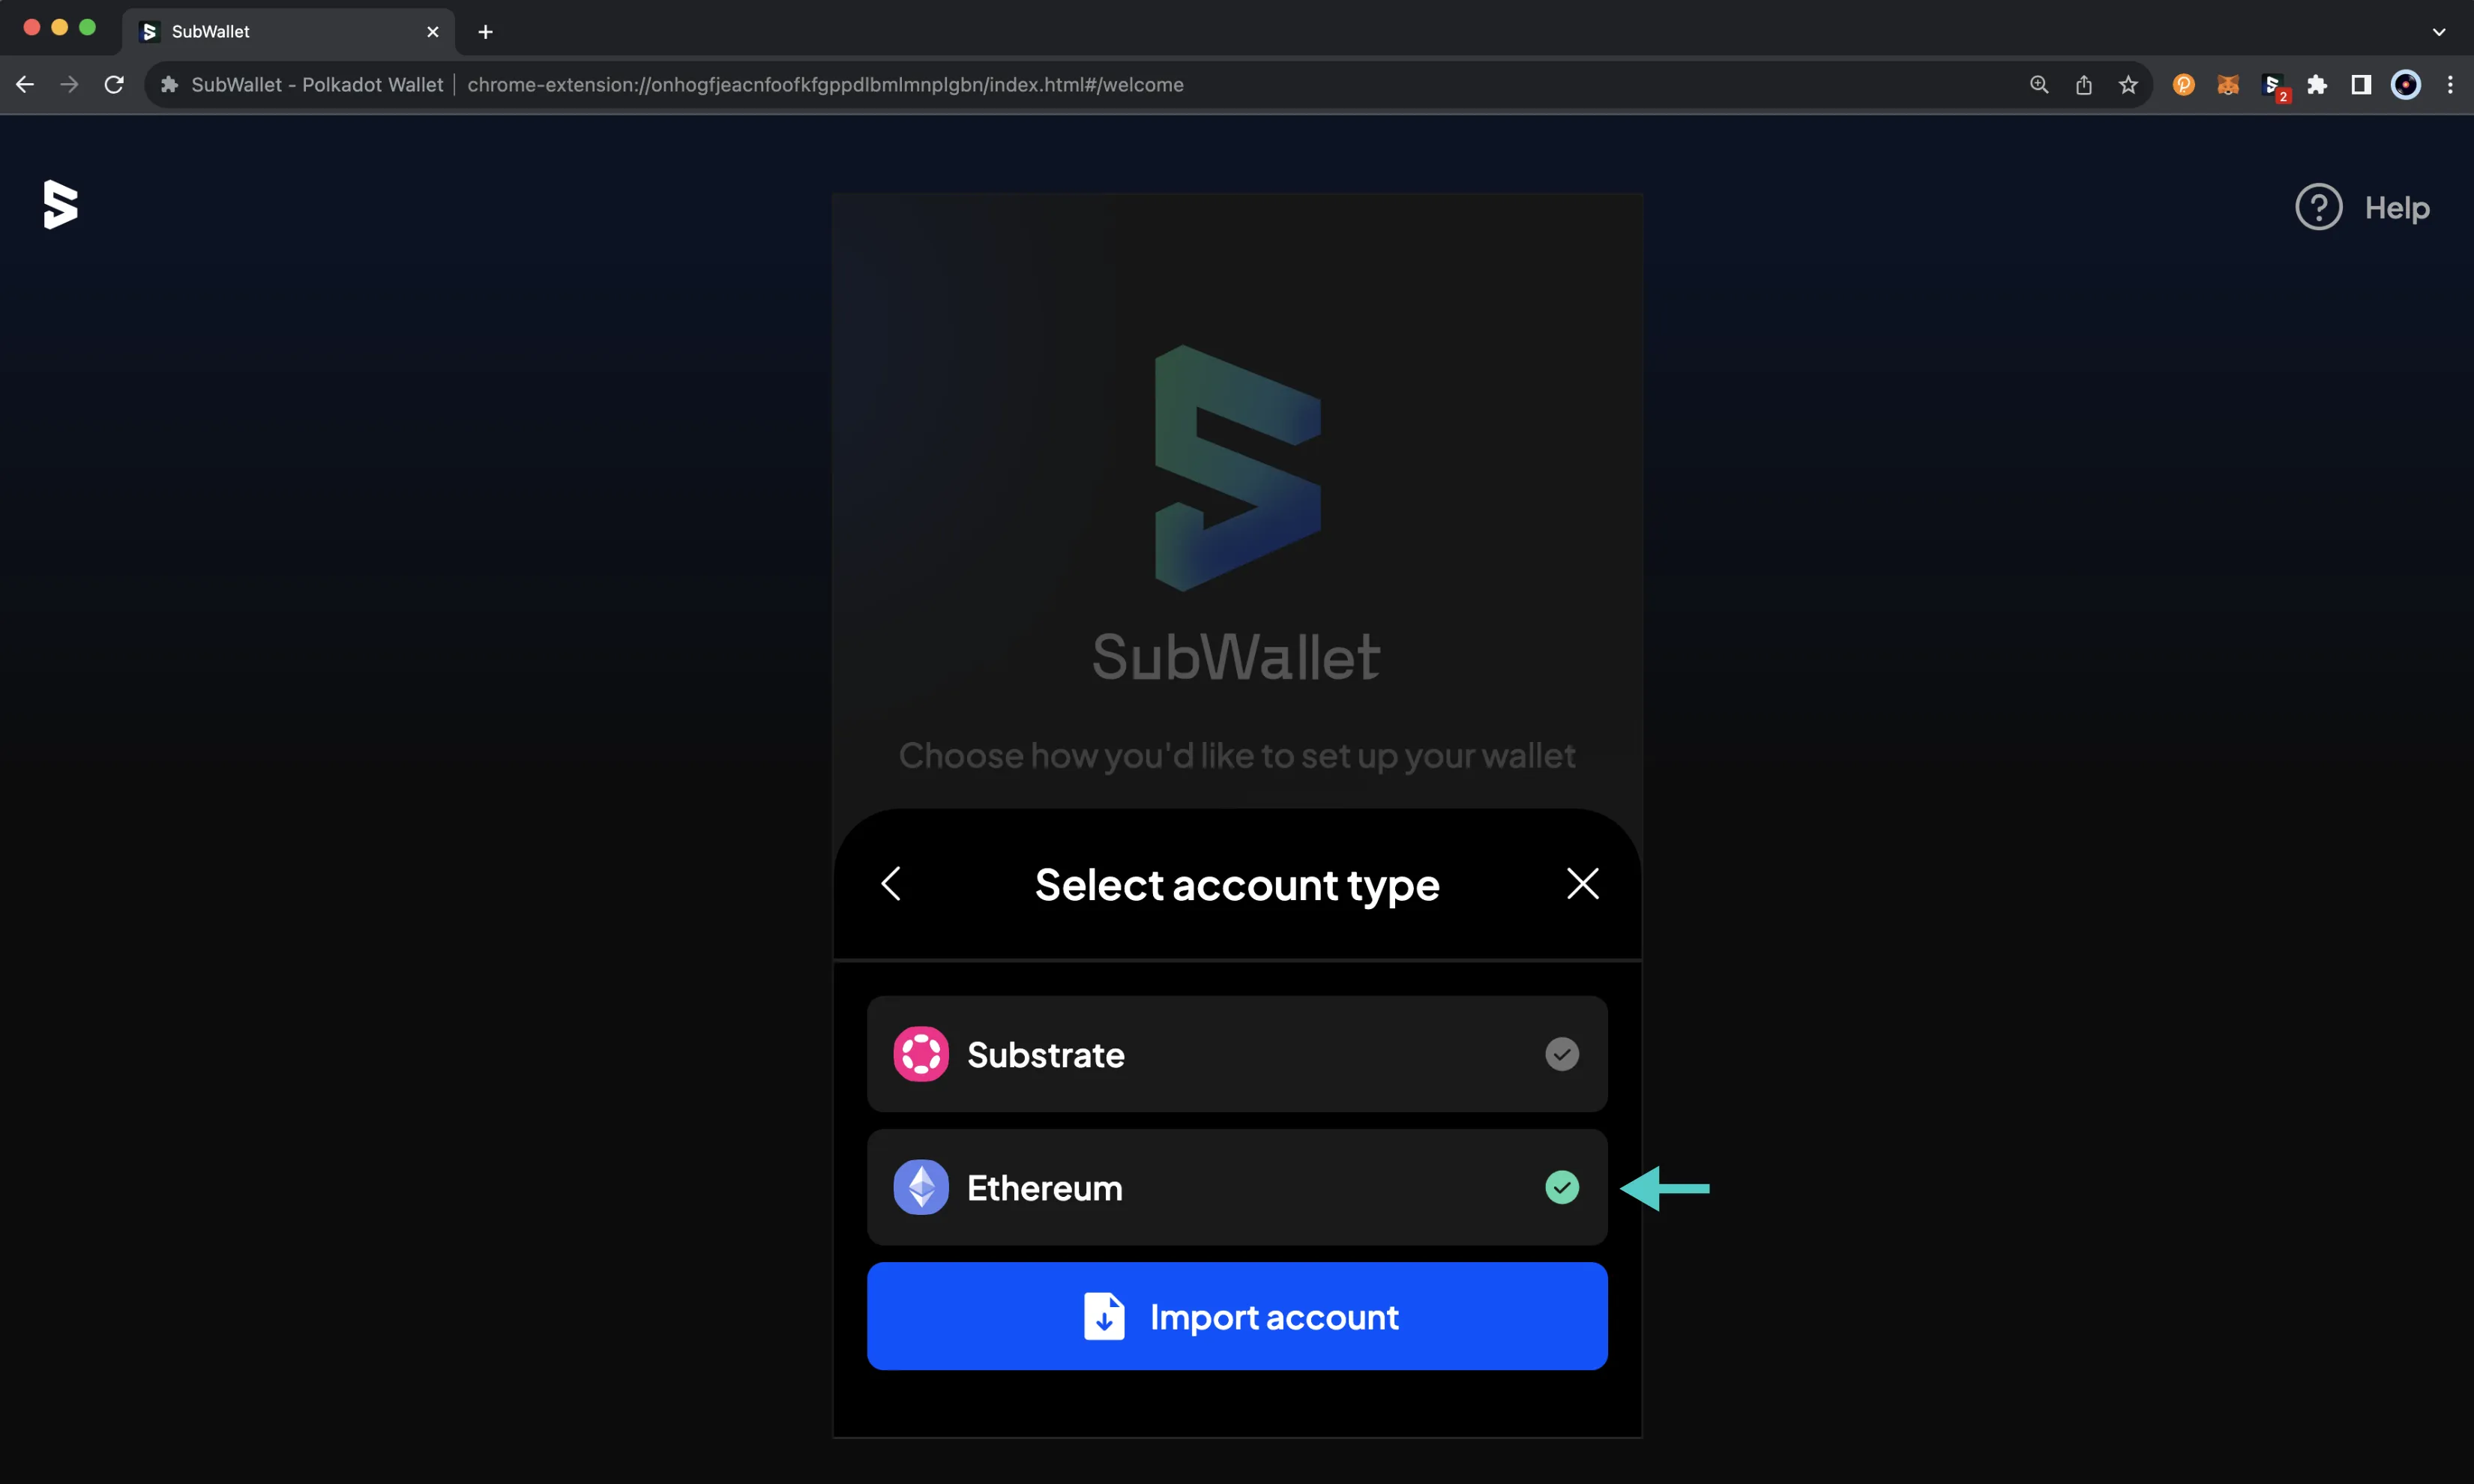 Select the account type to import on the SubWallet browser extension.